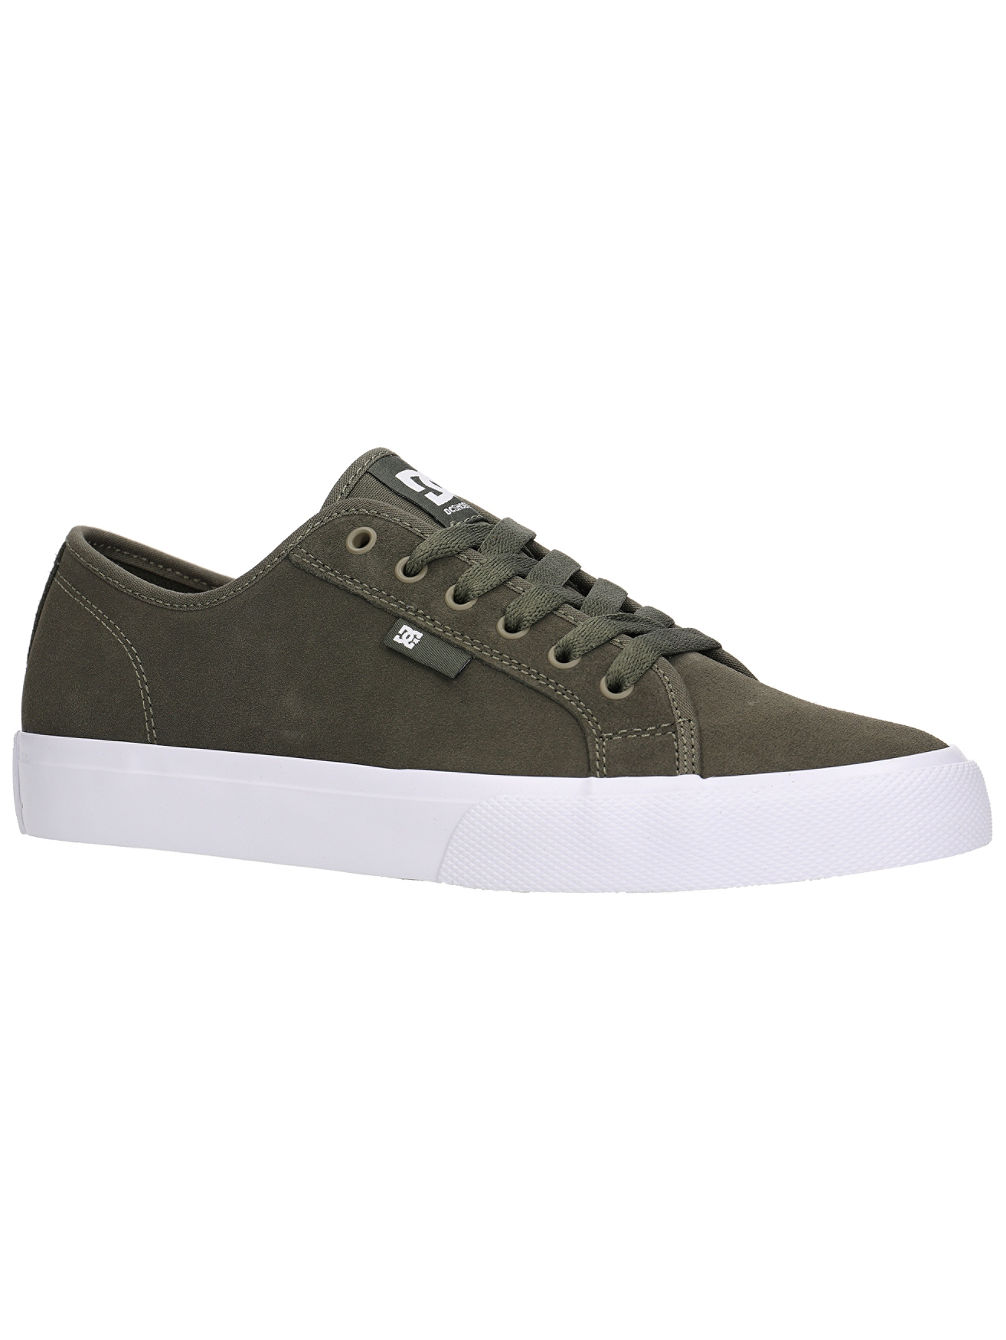 Manual S Leather Chaussures de skate